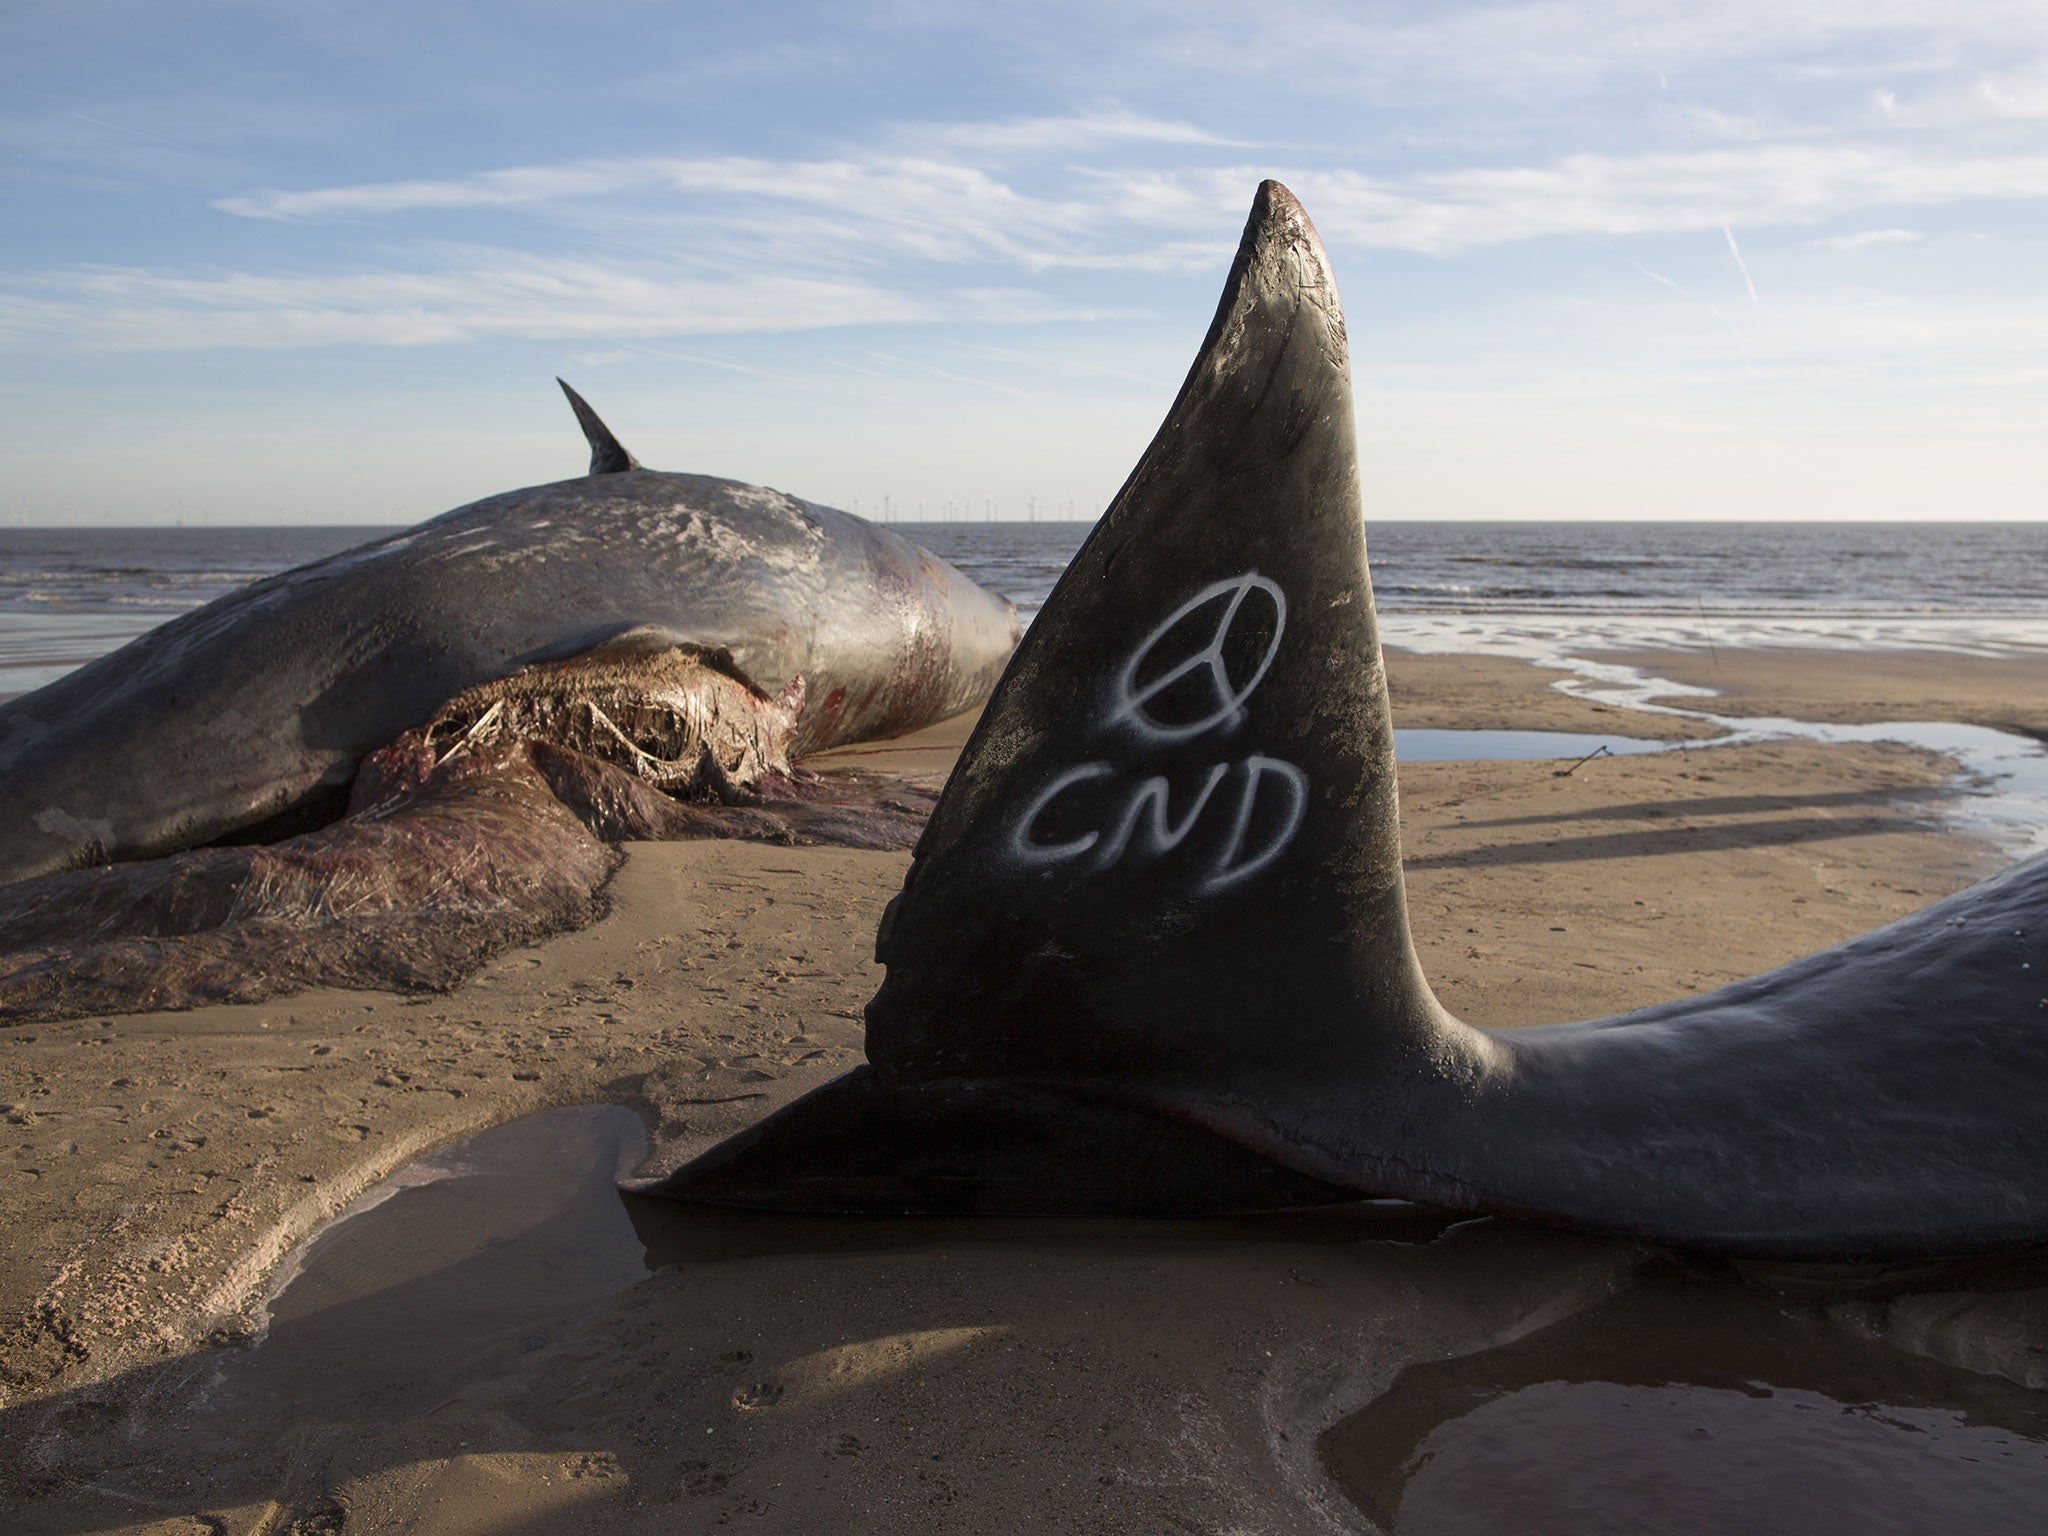 Graffiti saying 'CND' is seen on the tail of one of three Sperm Whales that were found washed ashore on a beach near Skegness over the weekend on January 25, 2016 in Skegness, England